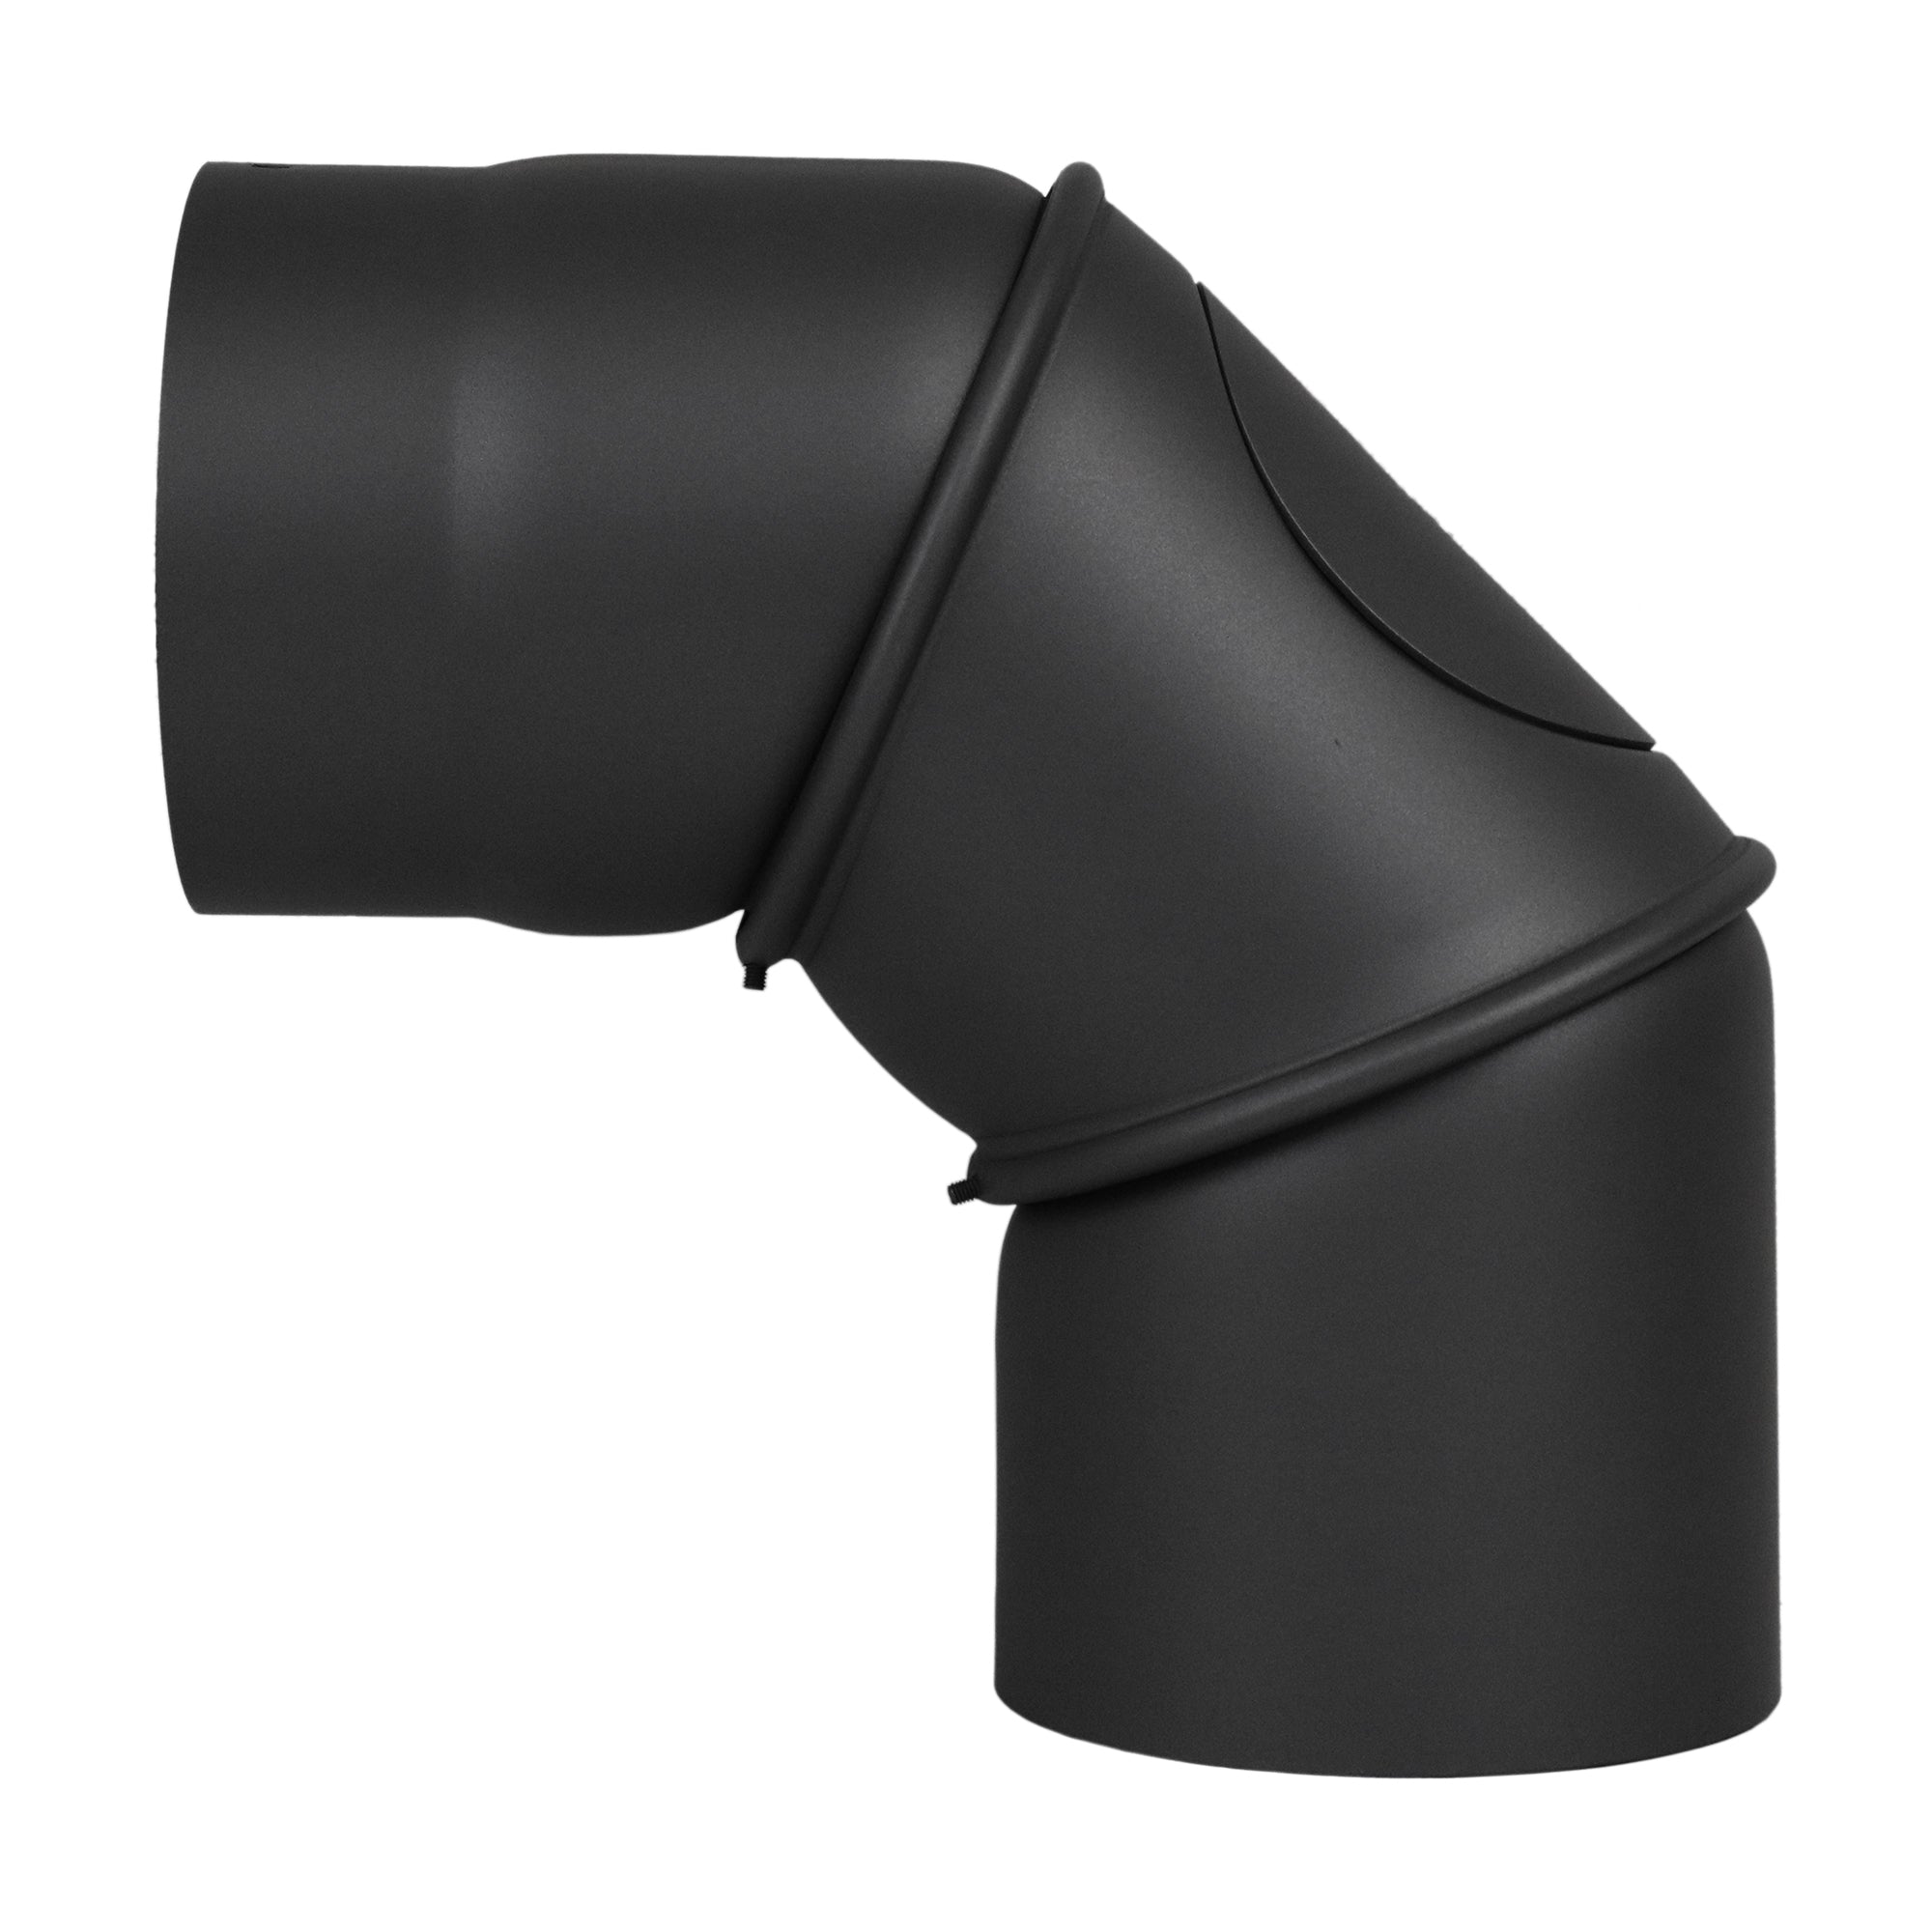 Stovepipe elbow 0° - 90° adjustable with cleaning door